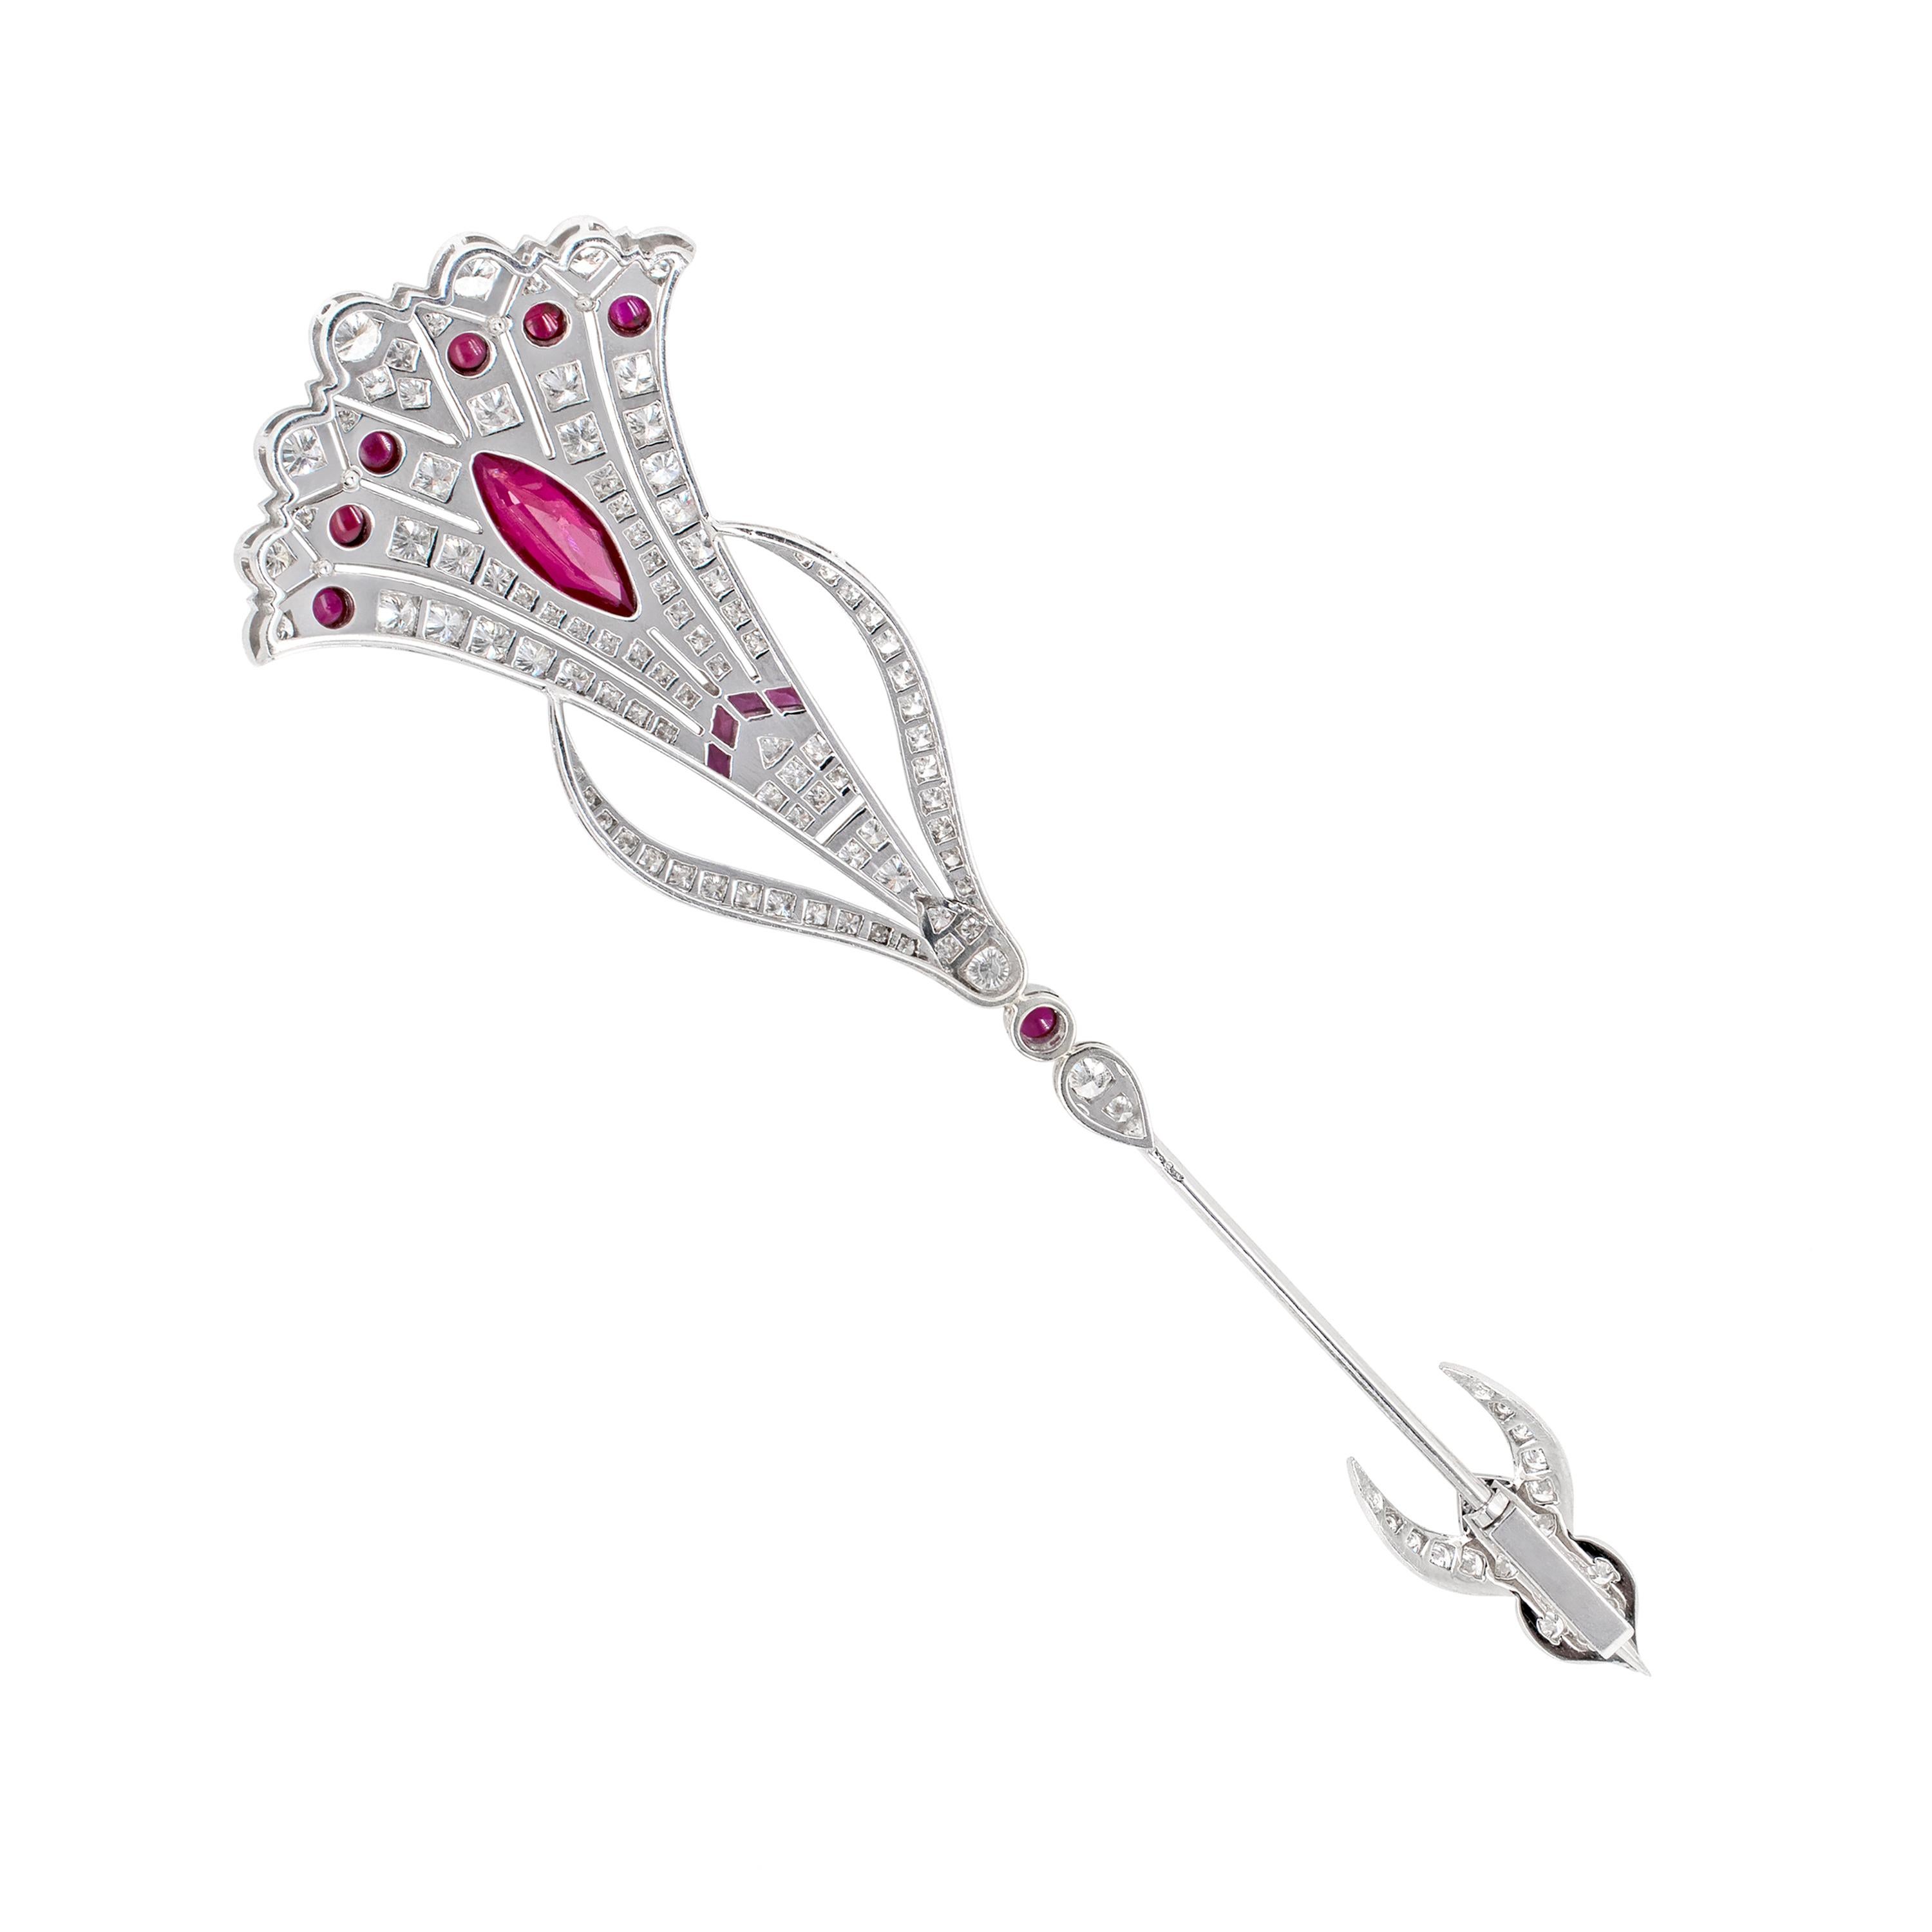 Fan jabot pin set with a vibrant marquise shaped ruby with an approximate weight of 1.40 carats, rub-over set in the center of a beautifully intricate diamond grain set design. There are approximately 3.00 carats of fine quality round diamonds in